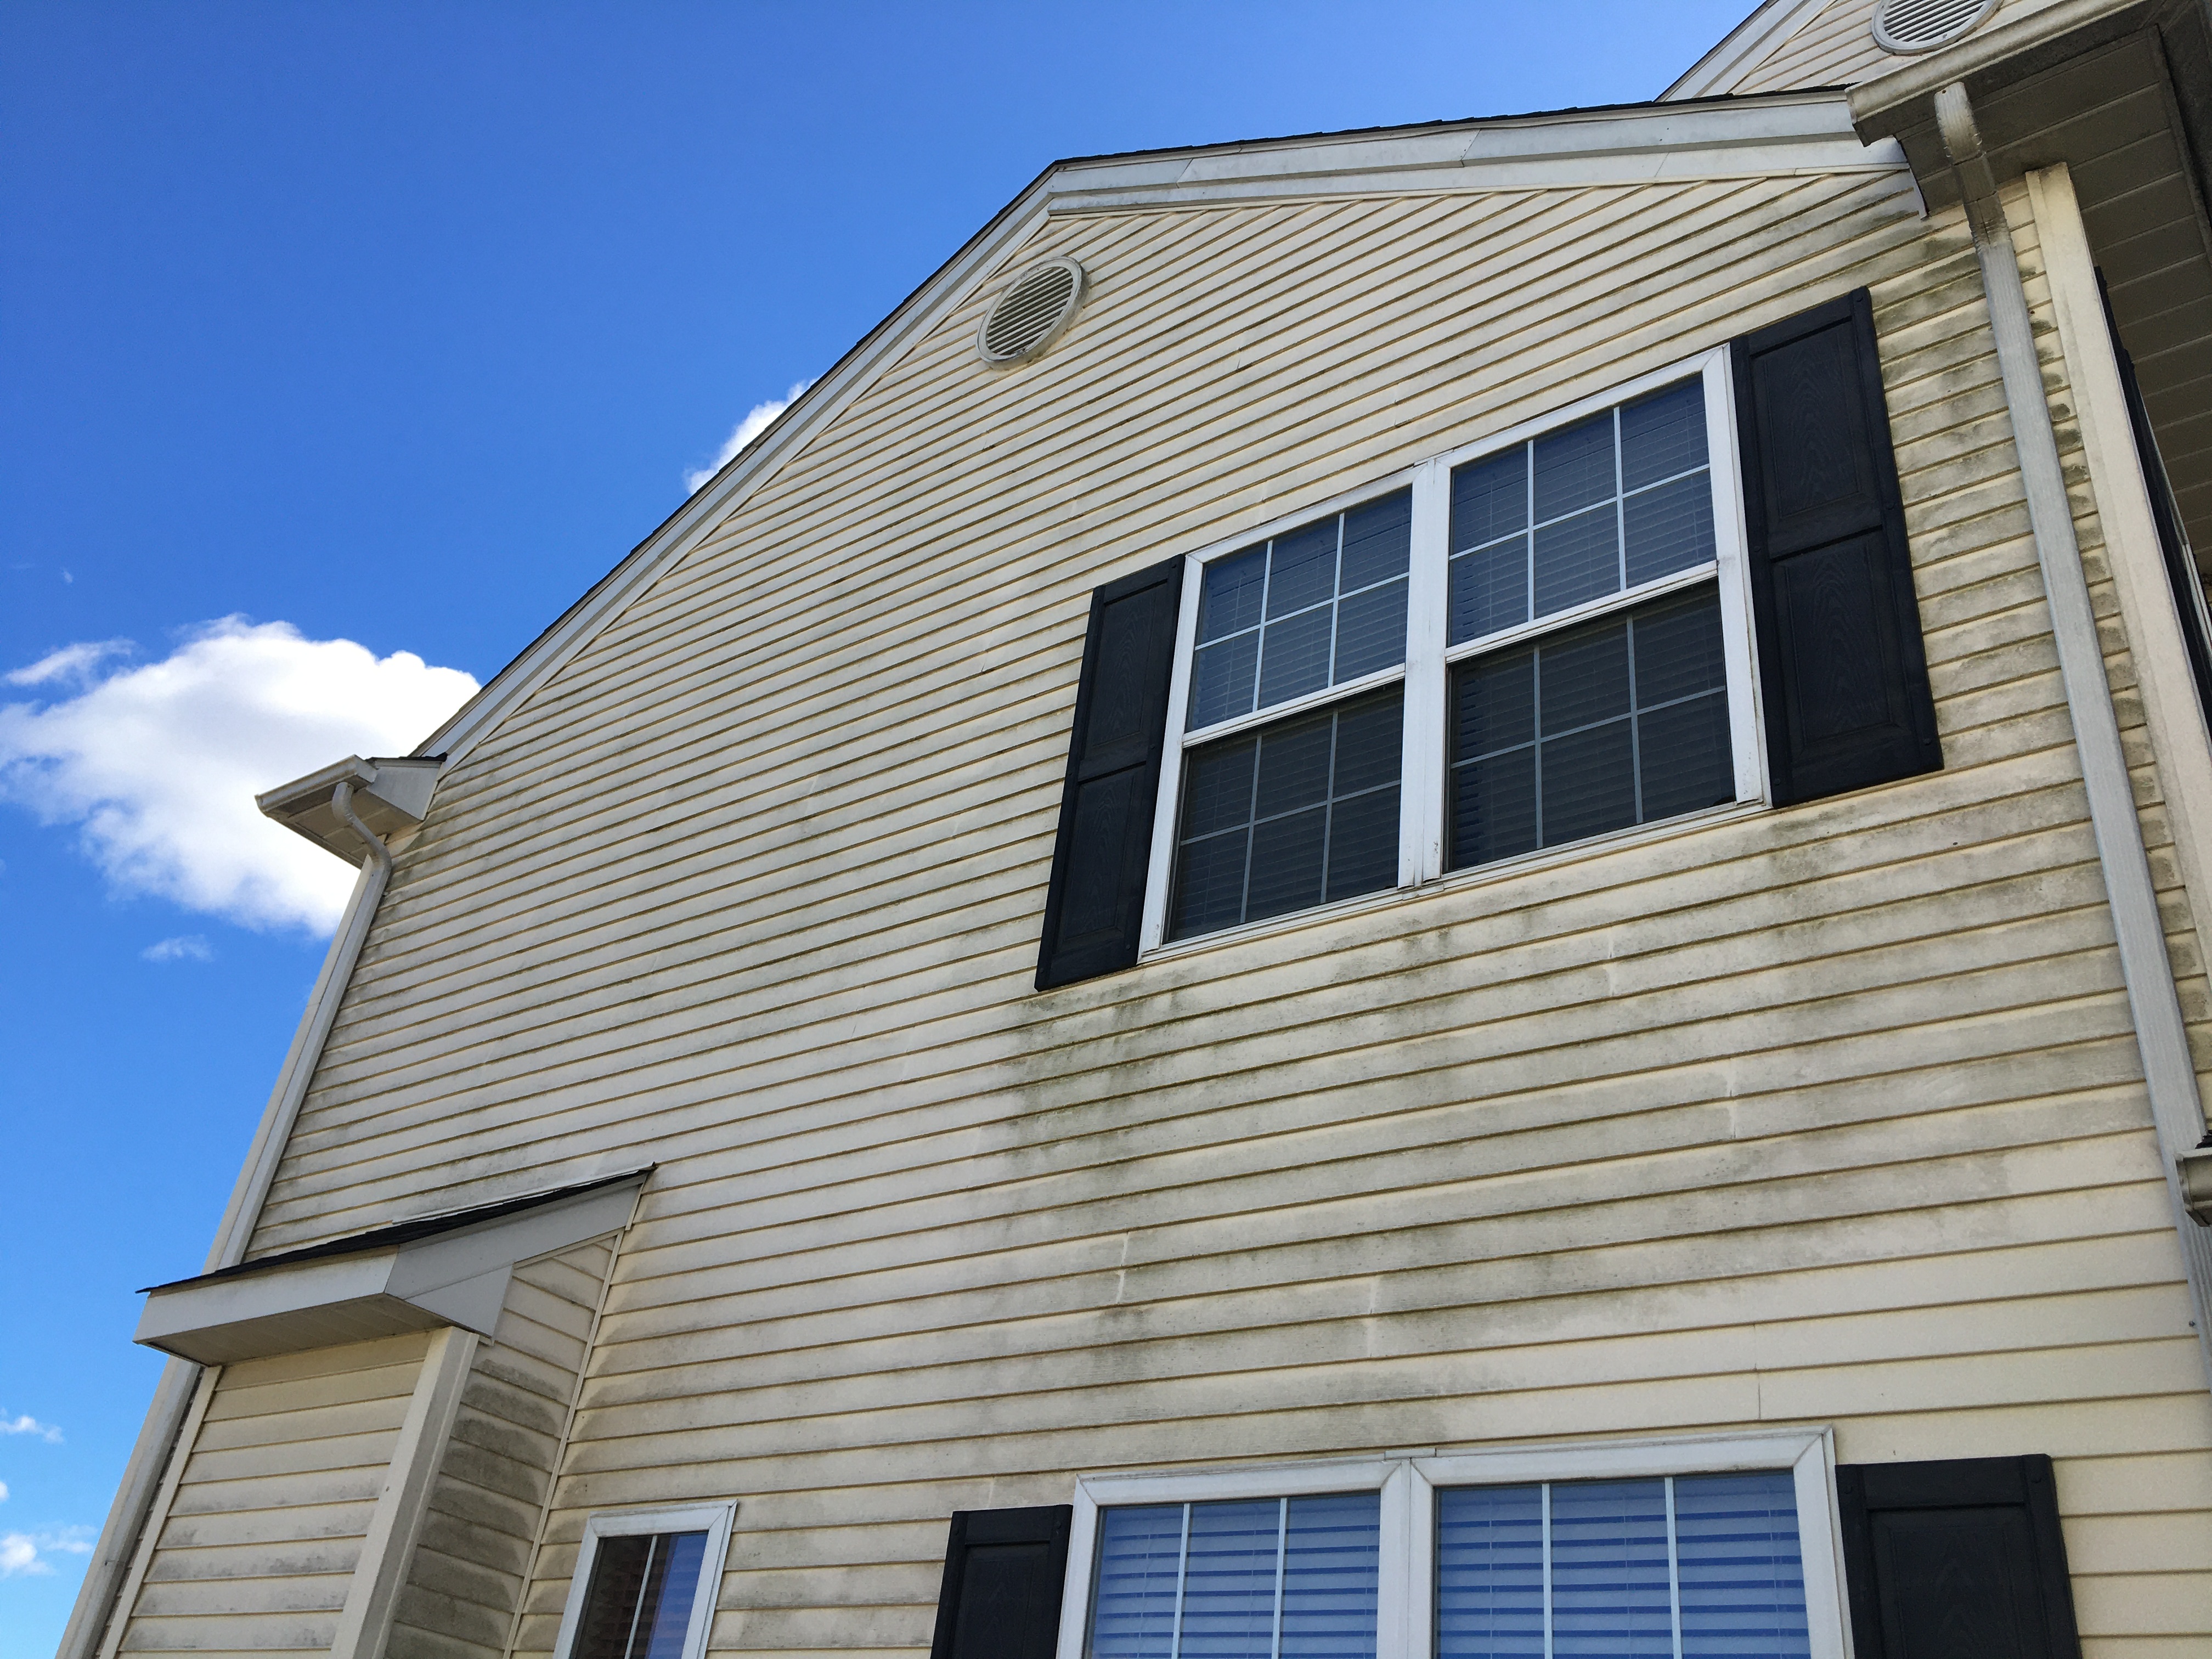 Townhome Soft Wash in Easton, PA